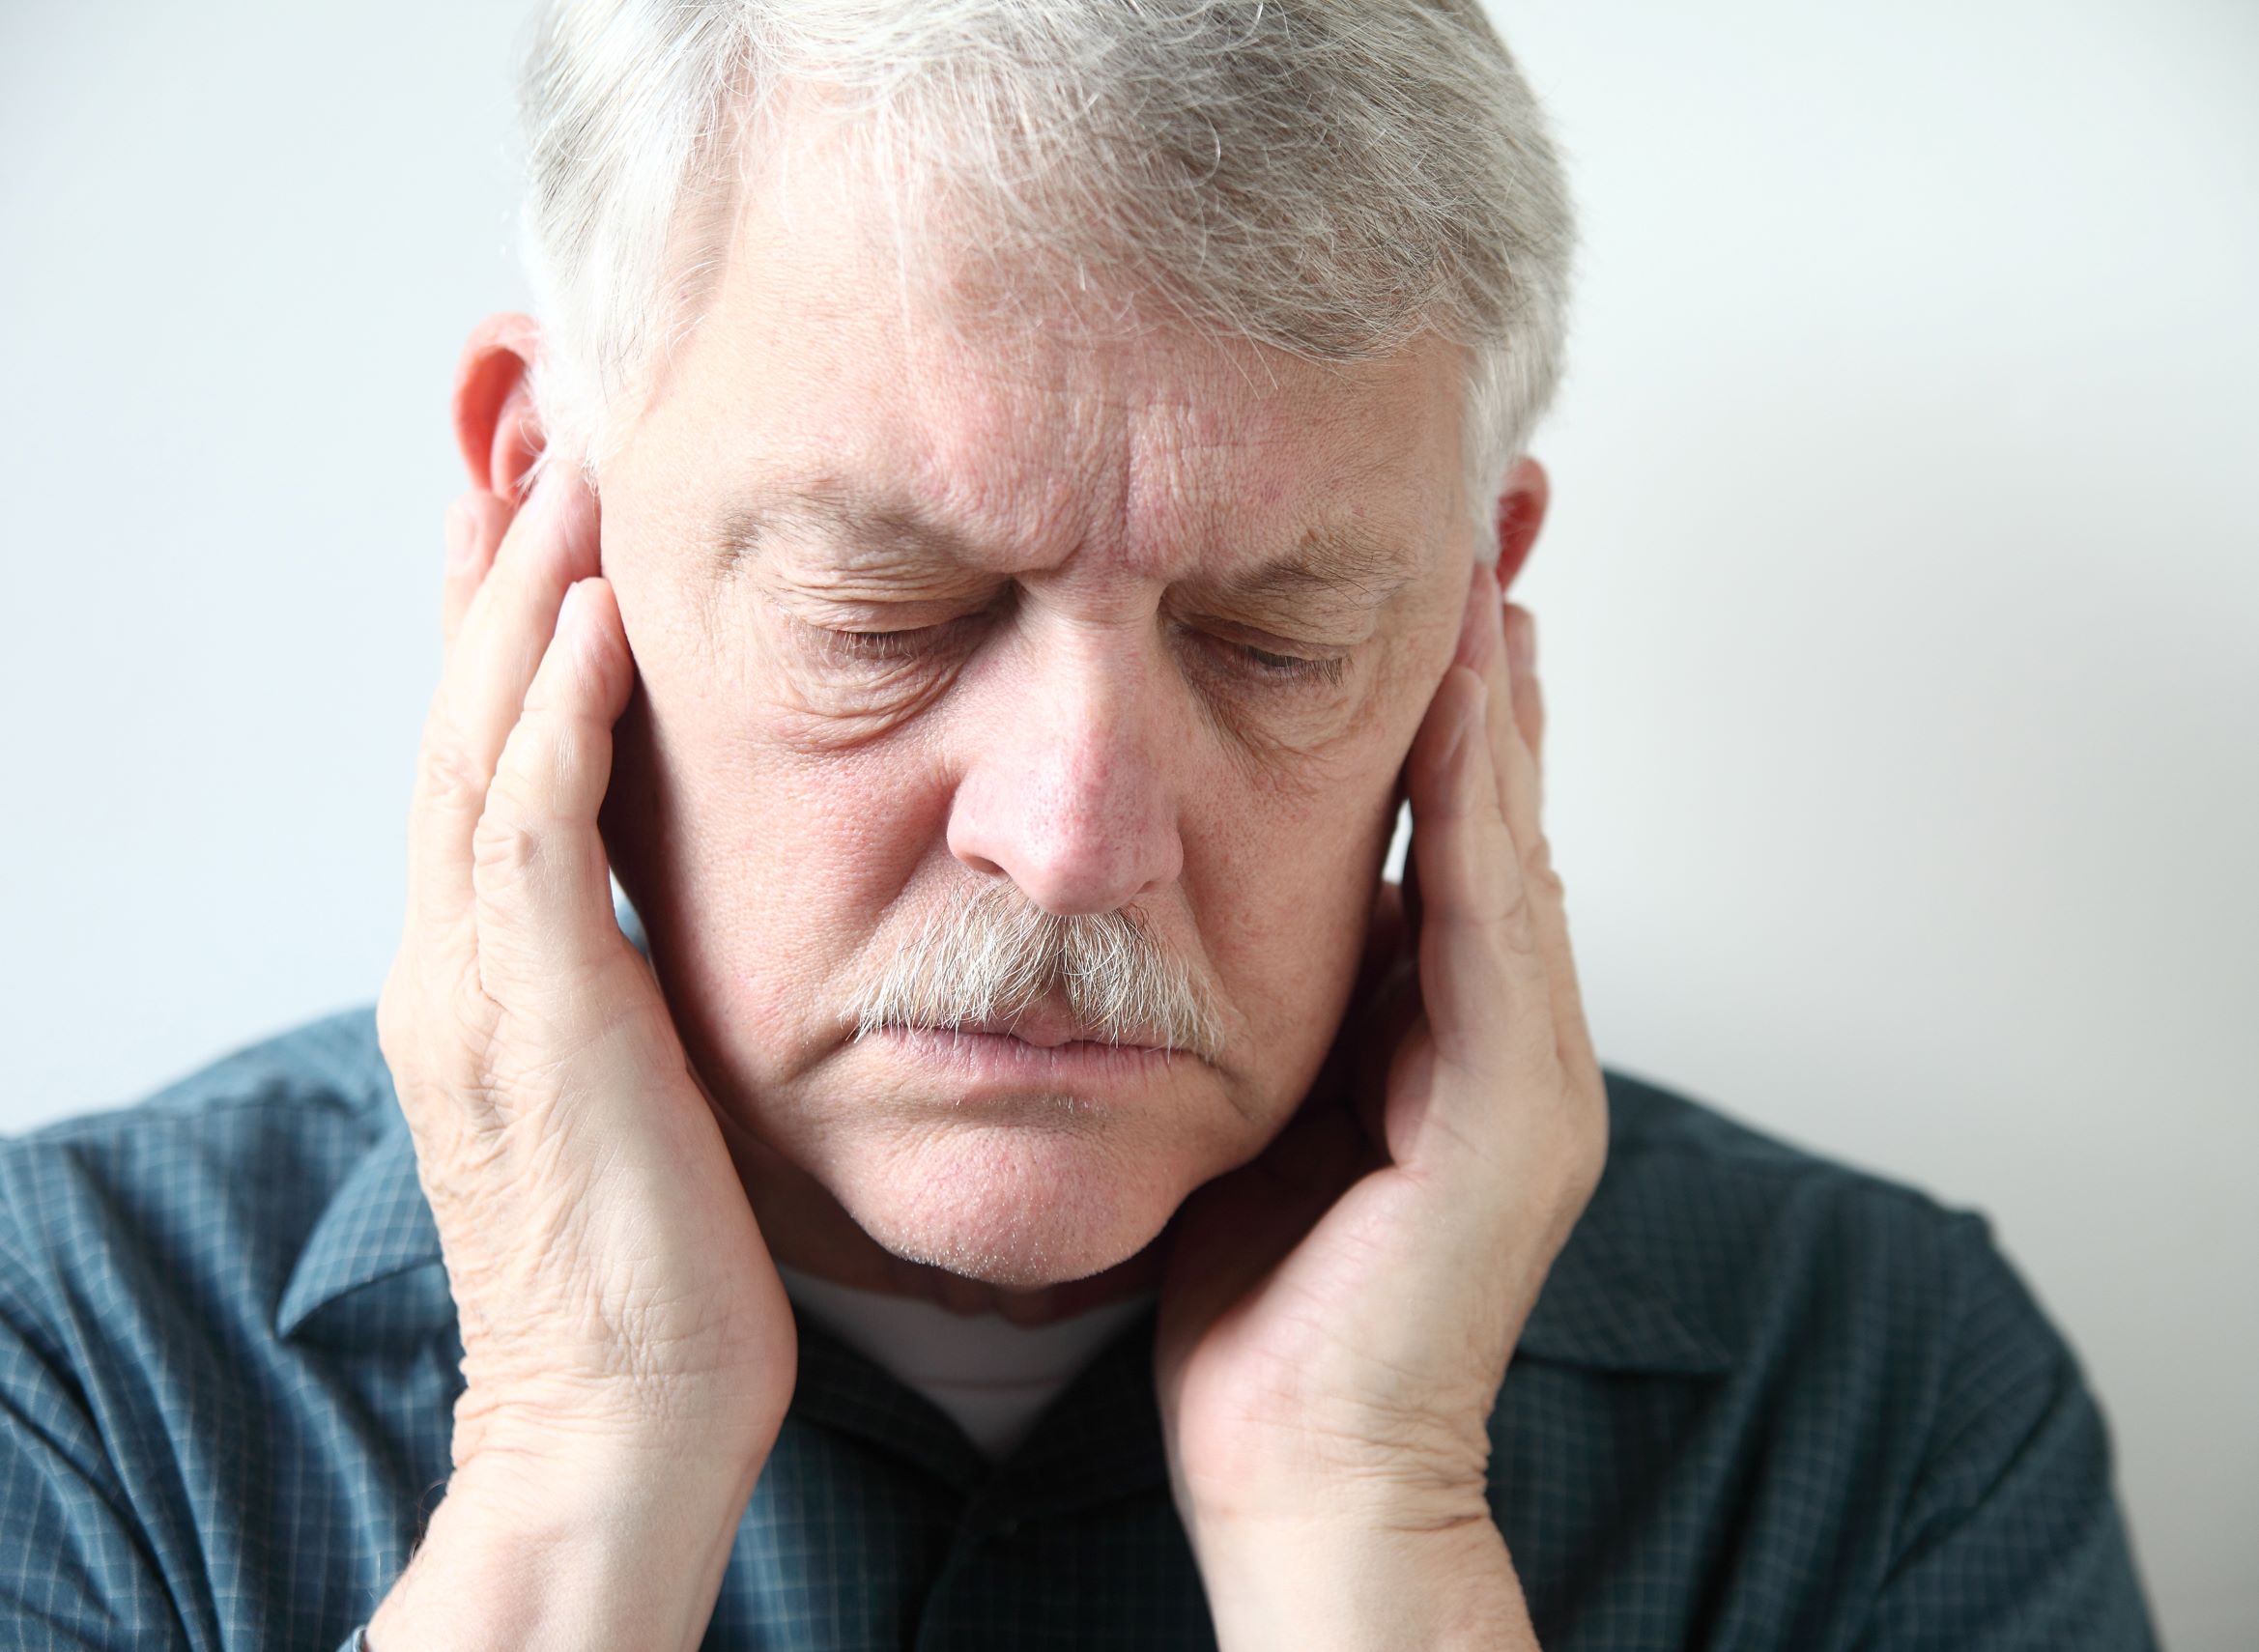 TMJ exercises can help treat jaw pain. In this image, a man is shown with his hands on his cheekbones to indicate jaw pain or a headache due to TMJ.